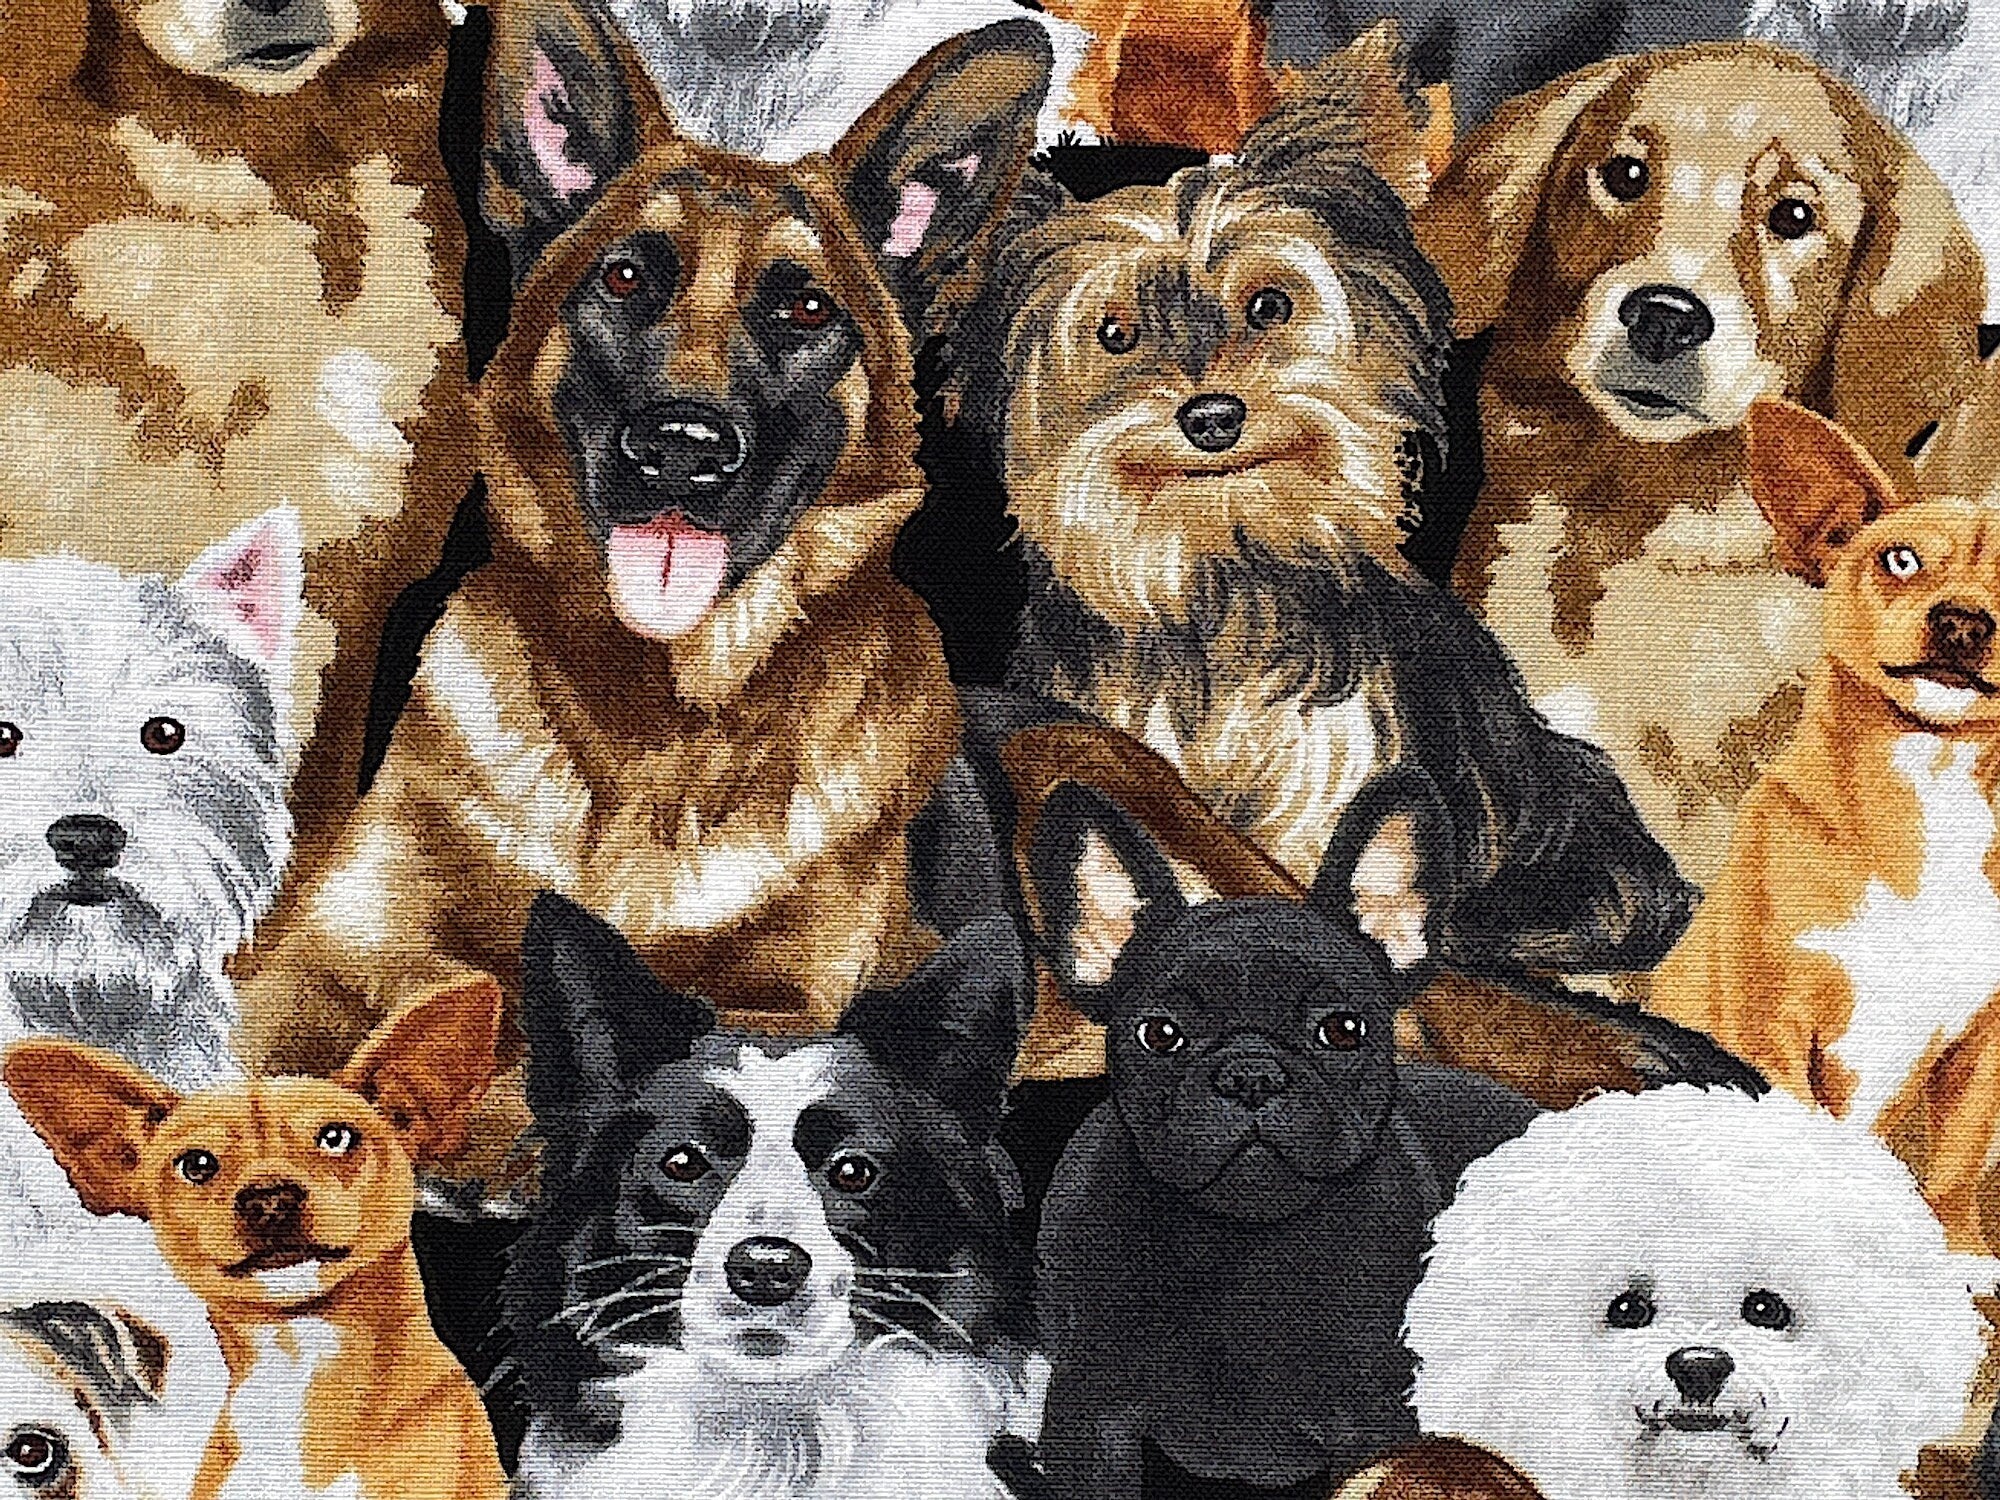 Cotton fabric covered with Yorkshire Terroirs, Labs and other breeds of dogs., 